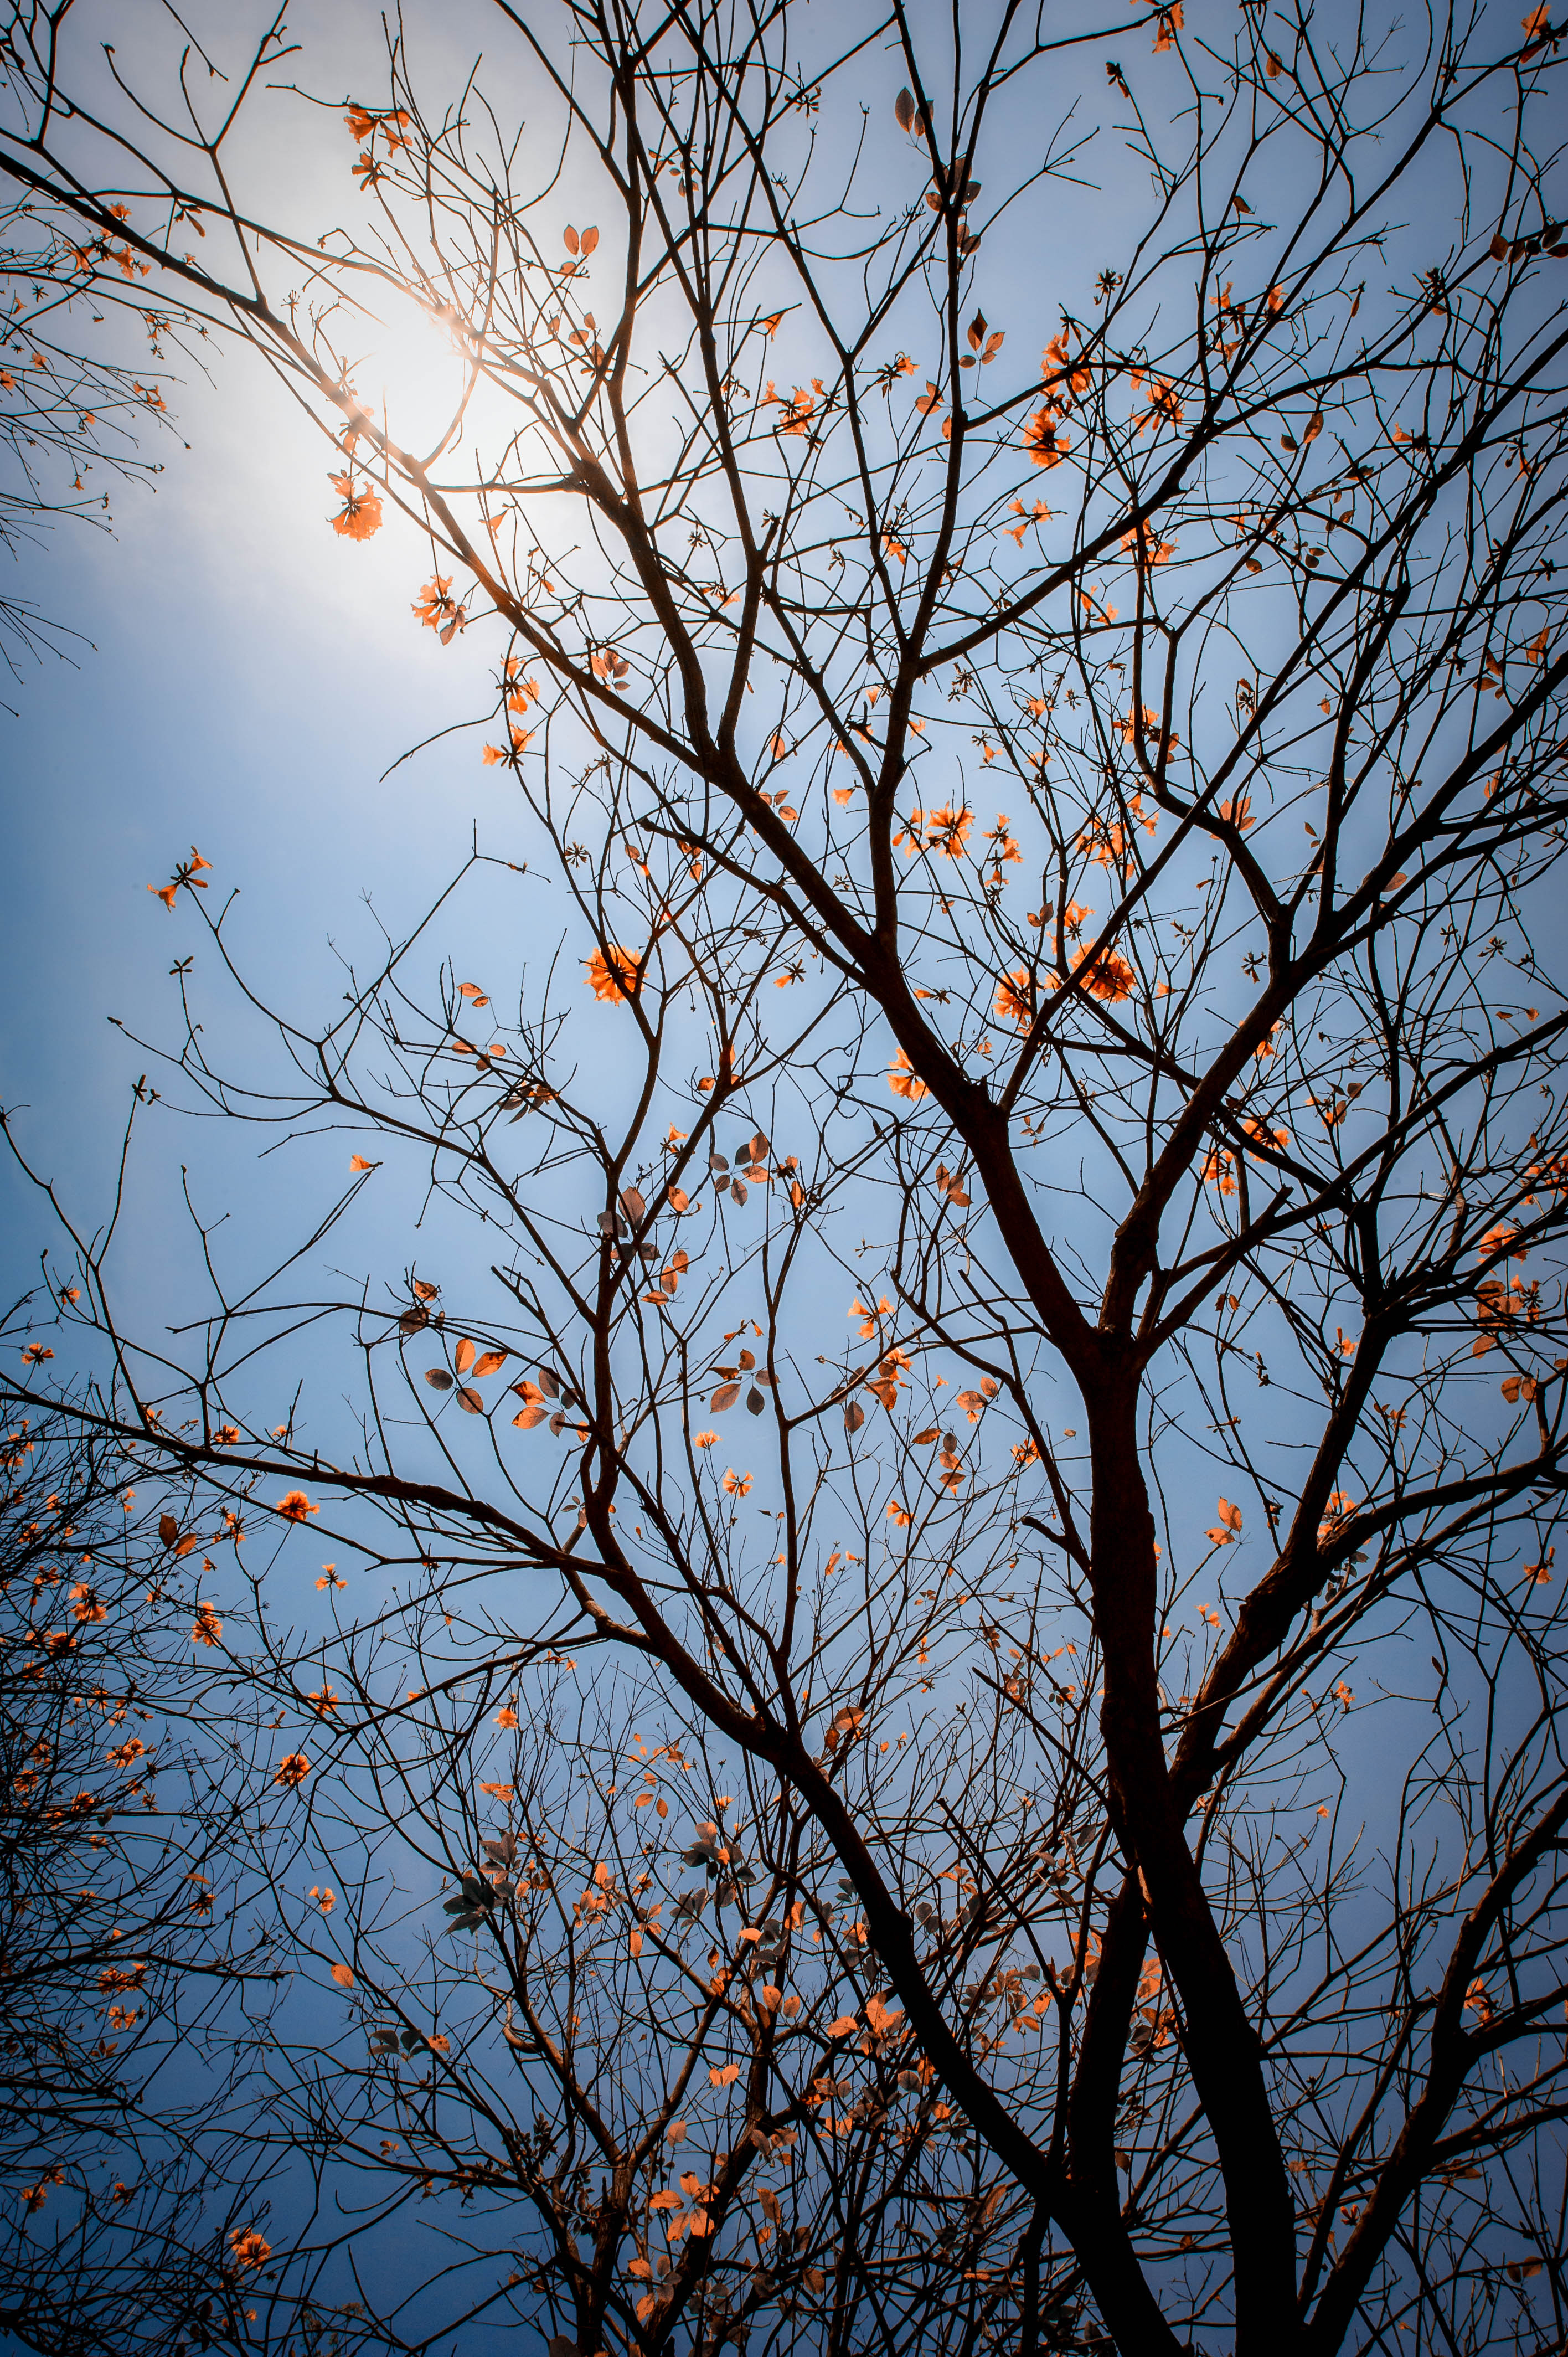 sky, nature, flowers, leaves, wood, tree, branches